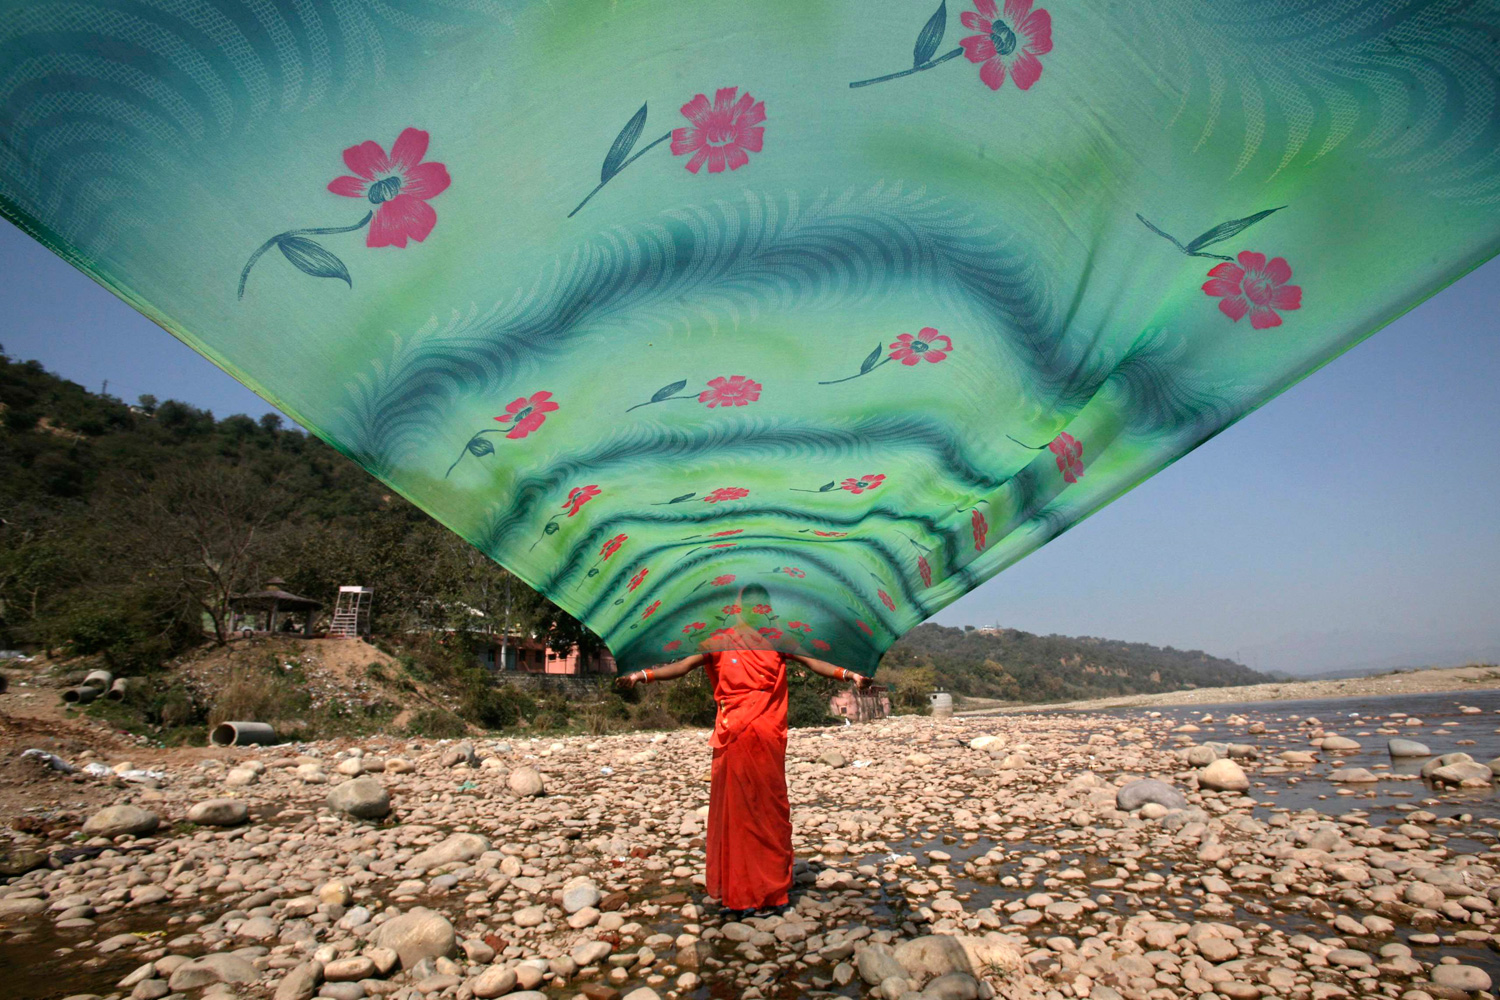 March 3, 2012. A woman dries her sari, a traditional cloth used for women's clothing, after washing it on the banks of river Tawi in Jammu, India.